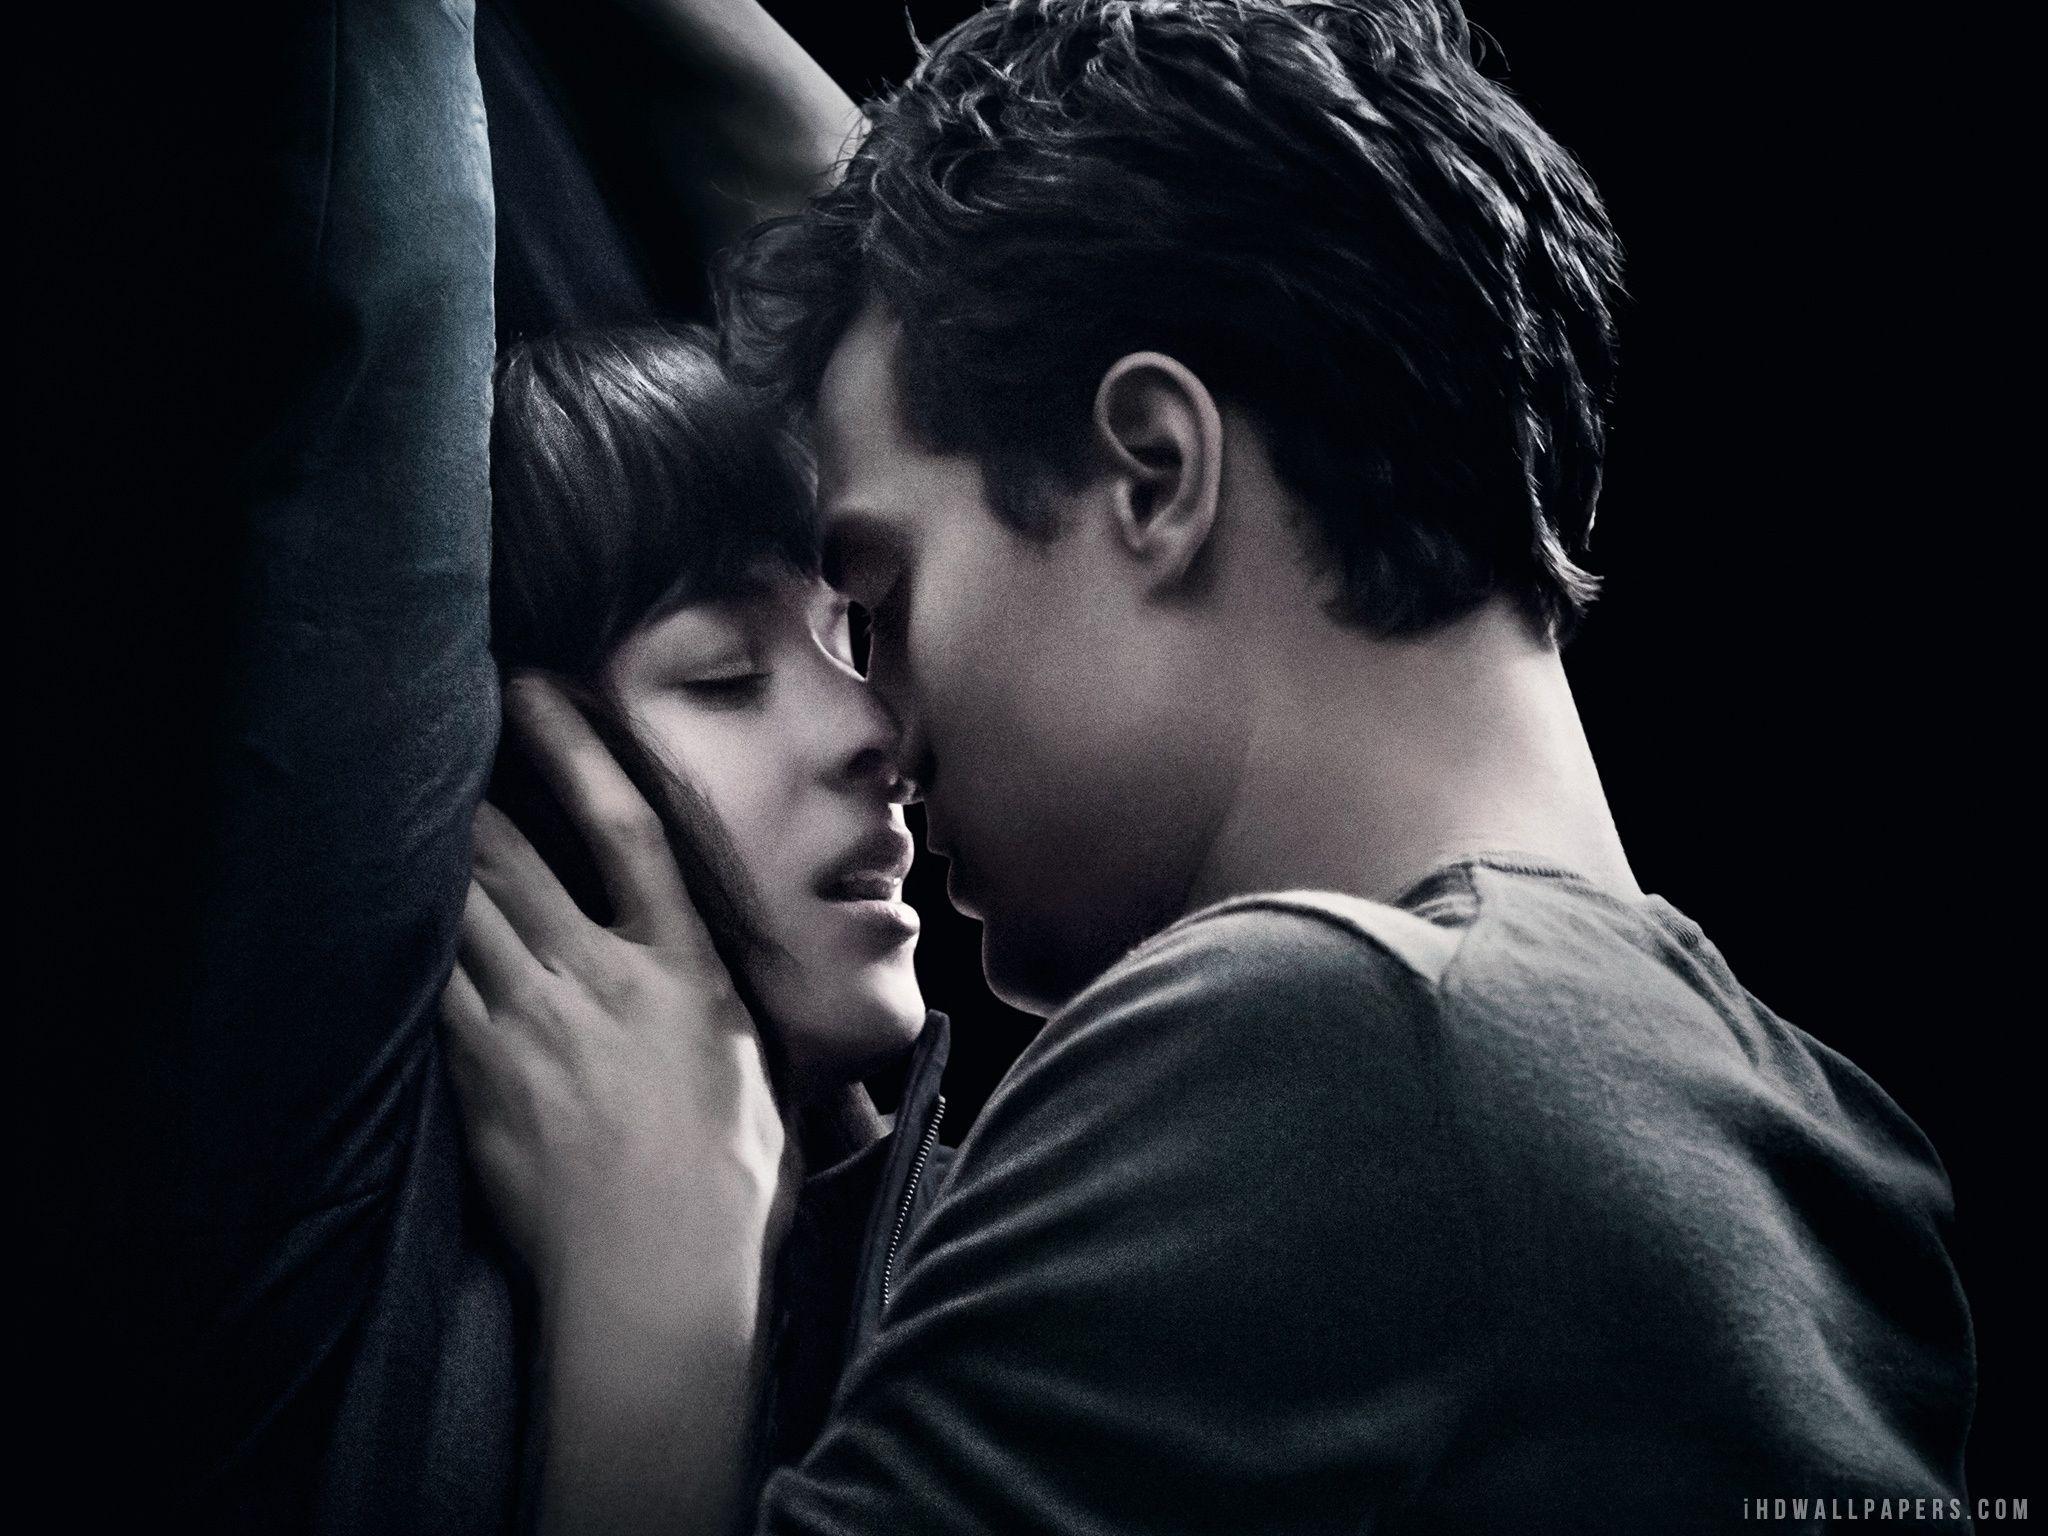 Movie Review: Fifty Shades of Grey. THE SANDBOX NEWS